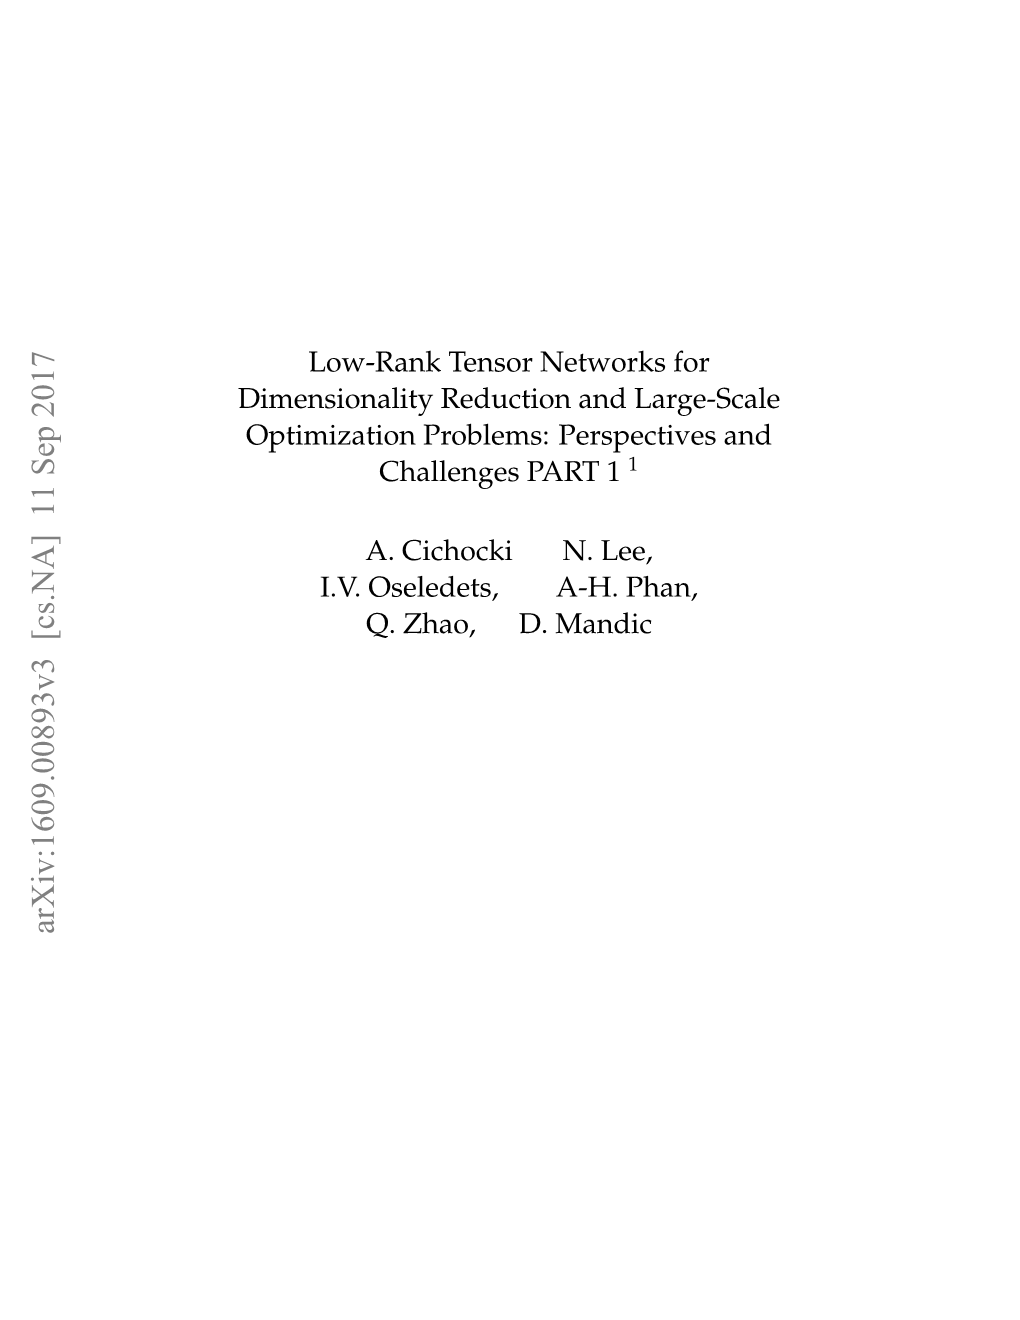 Low-Rank Tensor Networks for Dimensionality Reduction and Large-Scale Optimization Problems: Perspectives and Challenges PART 1 1